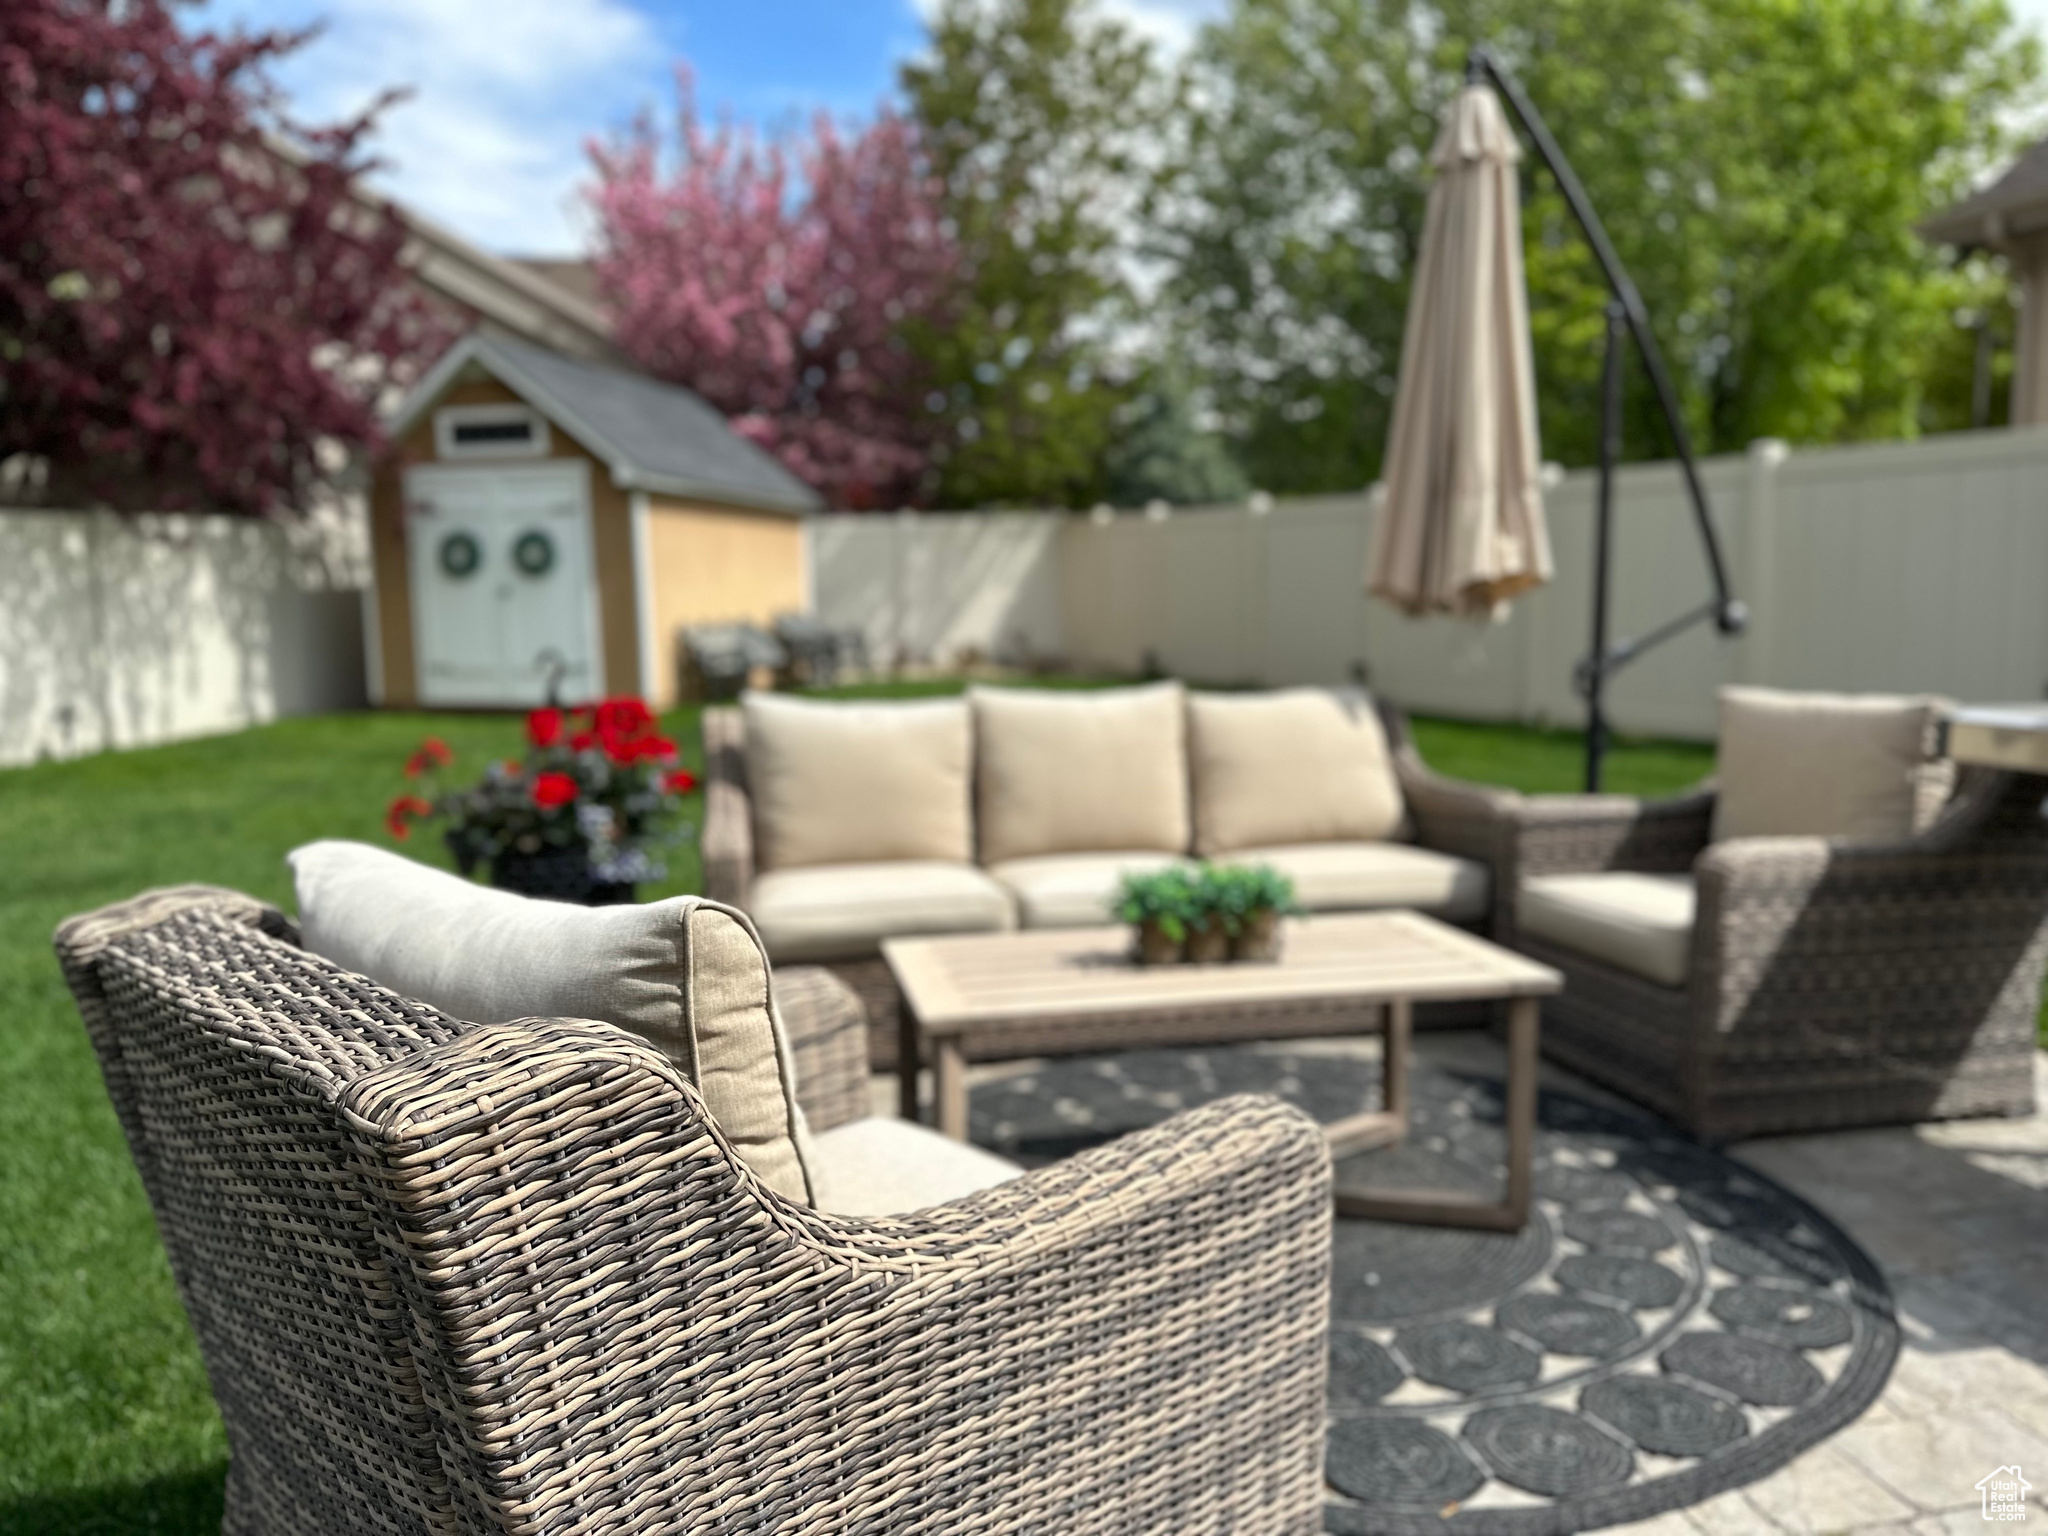 Back yard with patio furniture that is included in the sale